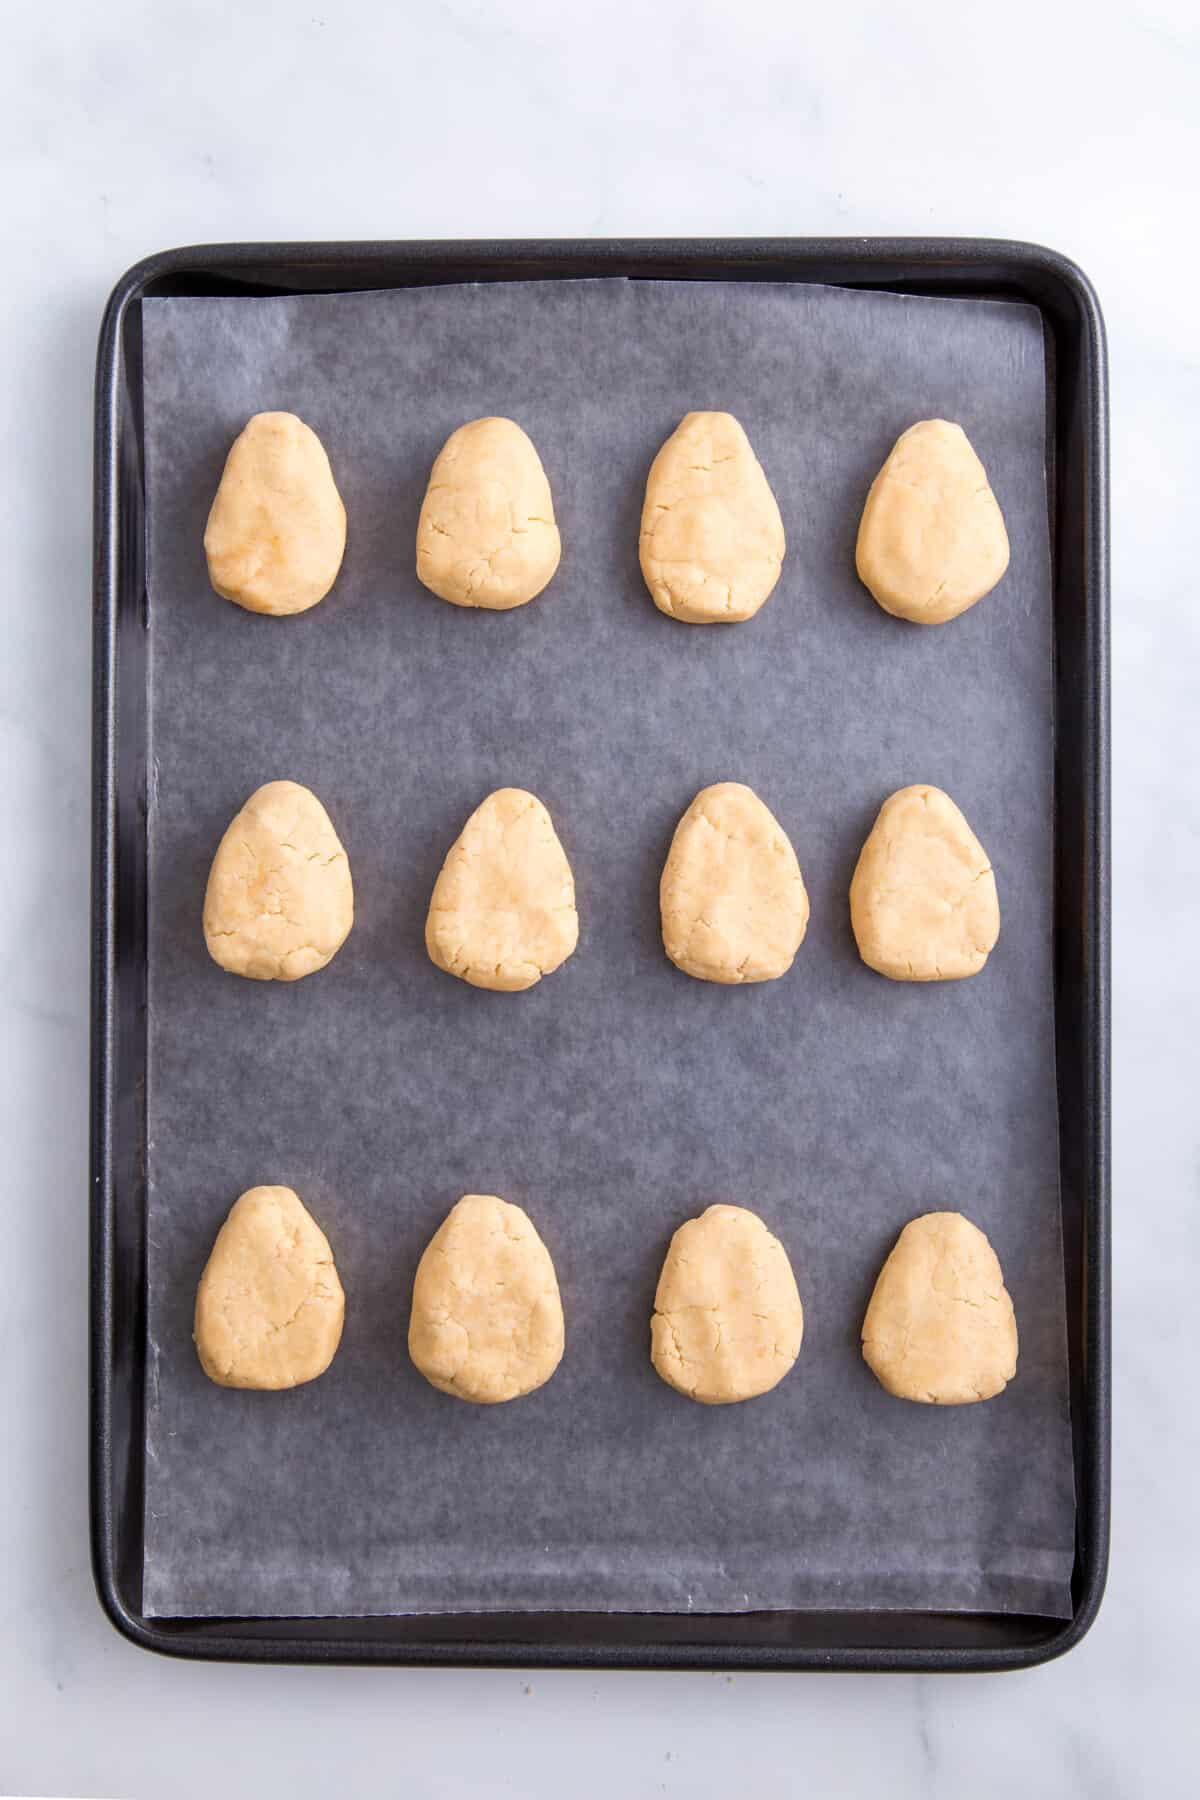 12 peanut butter dessert filling shaped into an egg and lined on a baking tray.